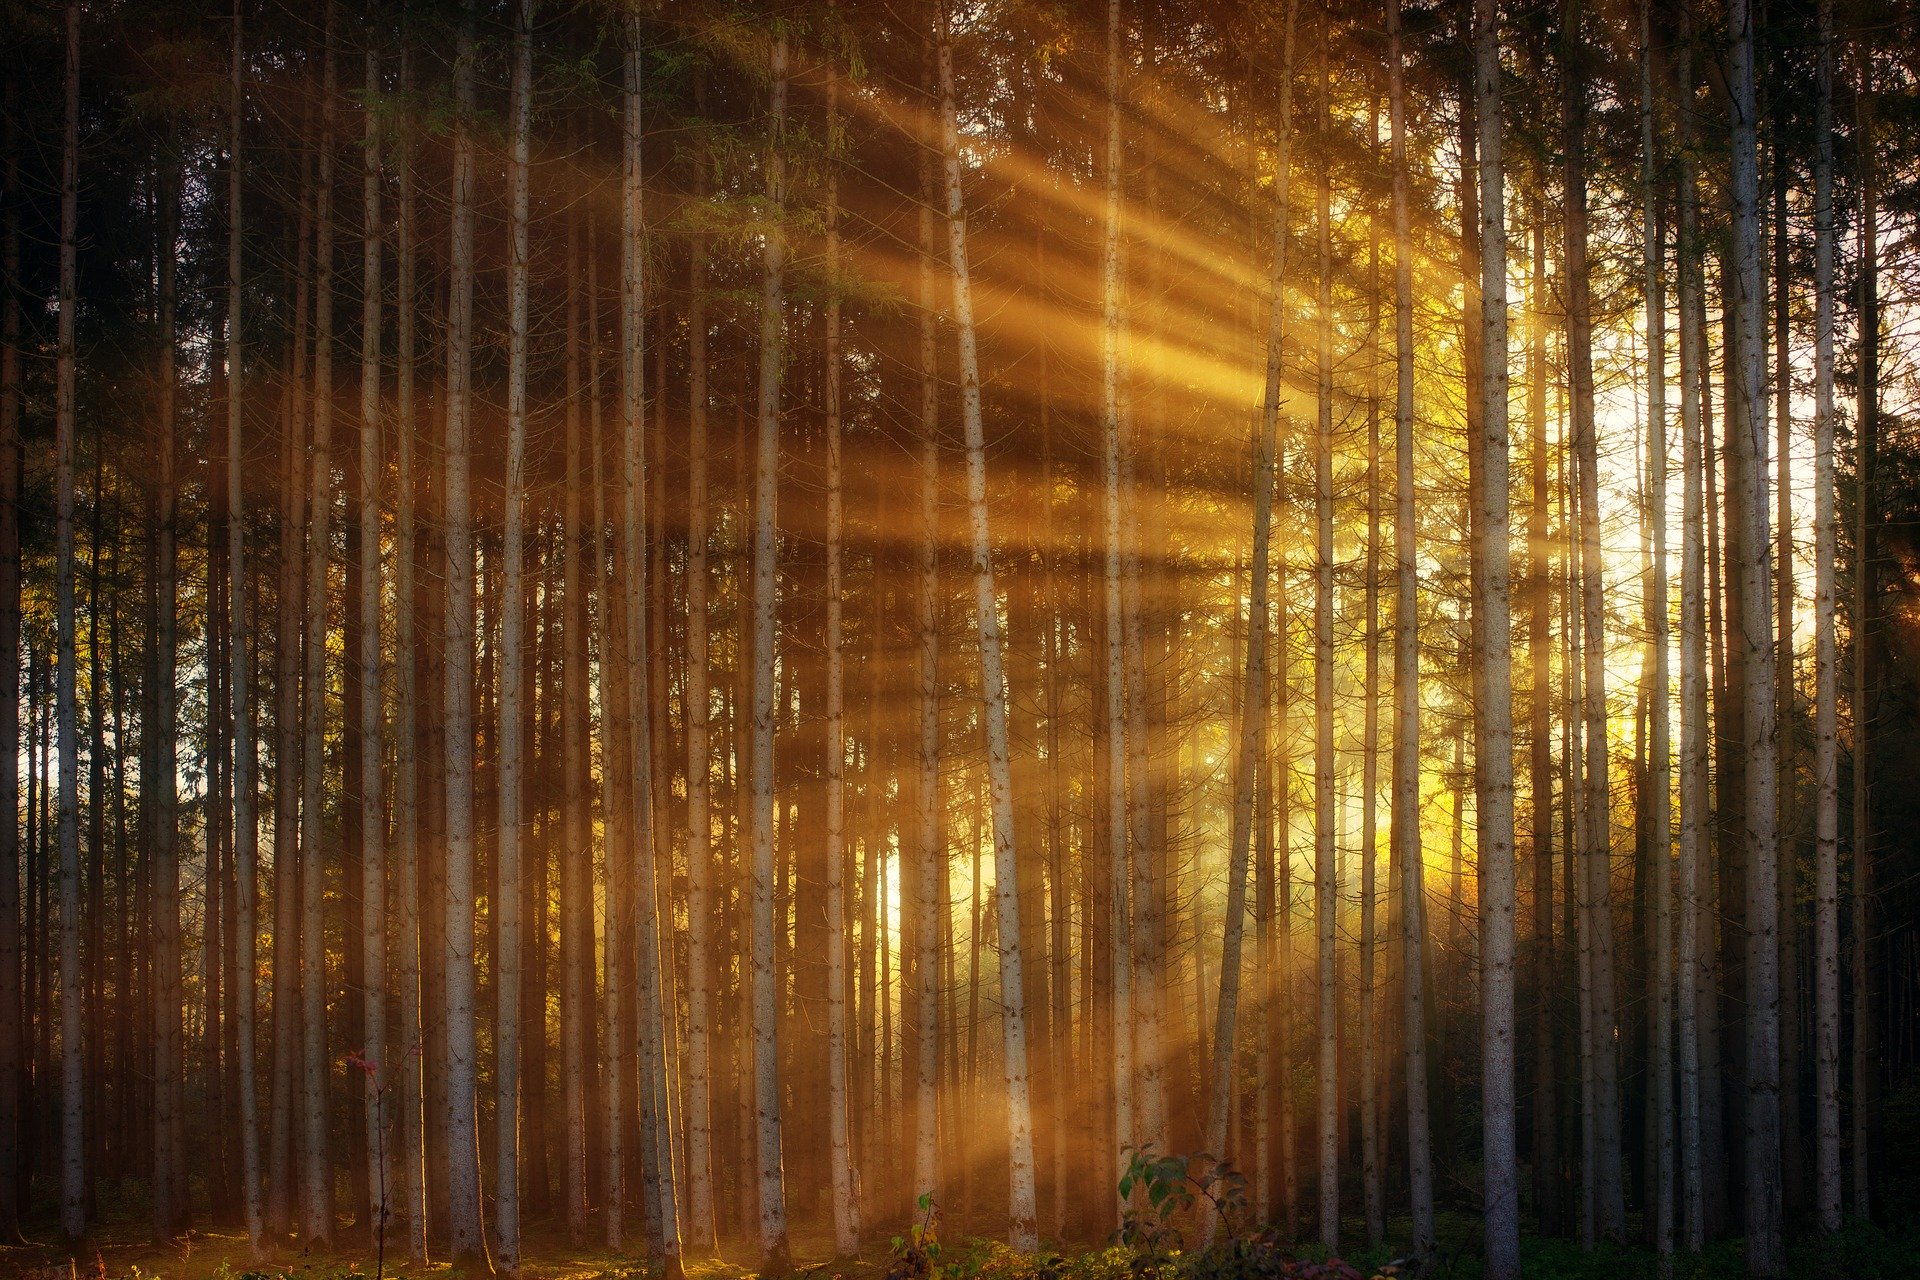 Rays of light filtered through a forest